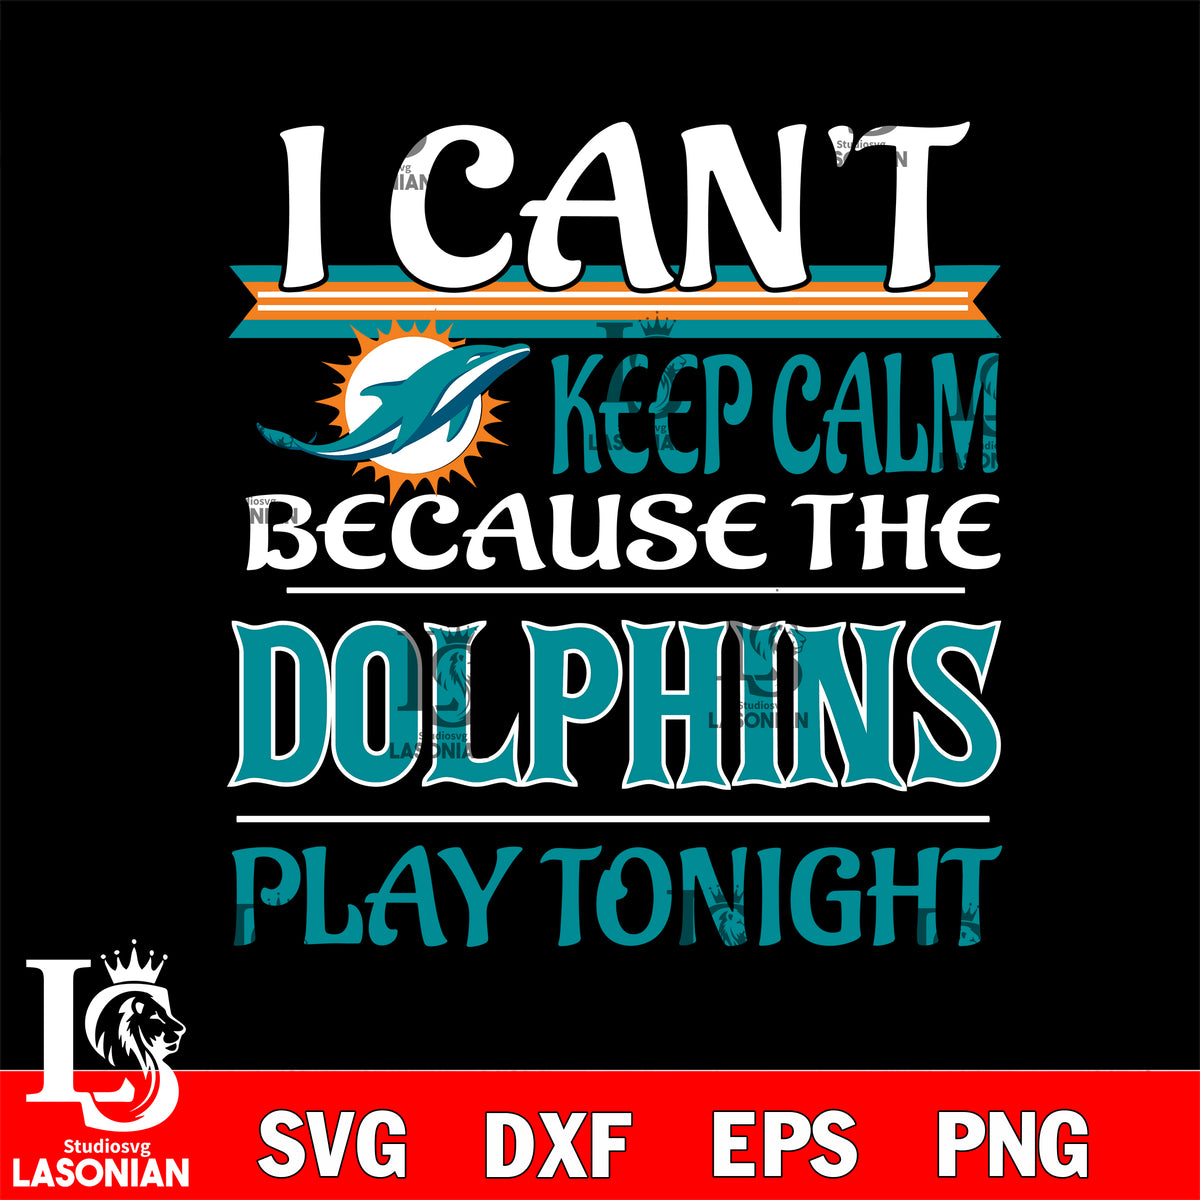 who do the dolphins play tonight